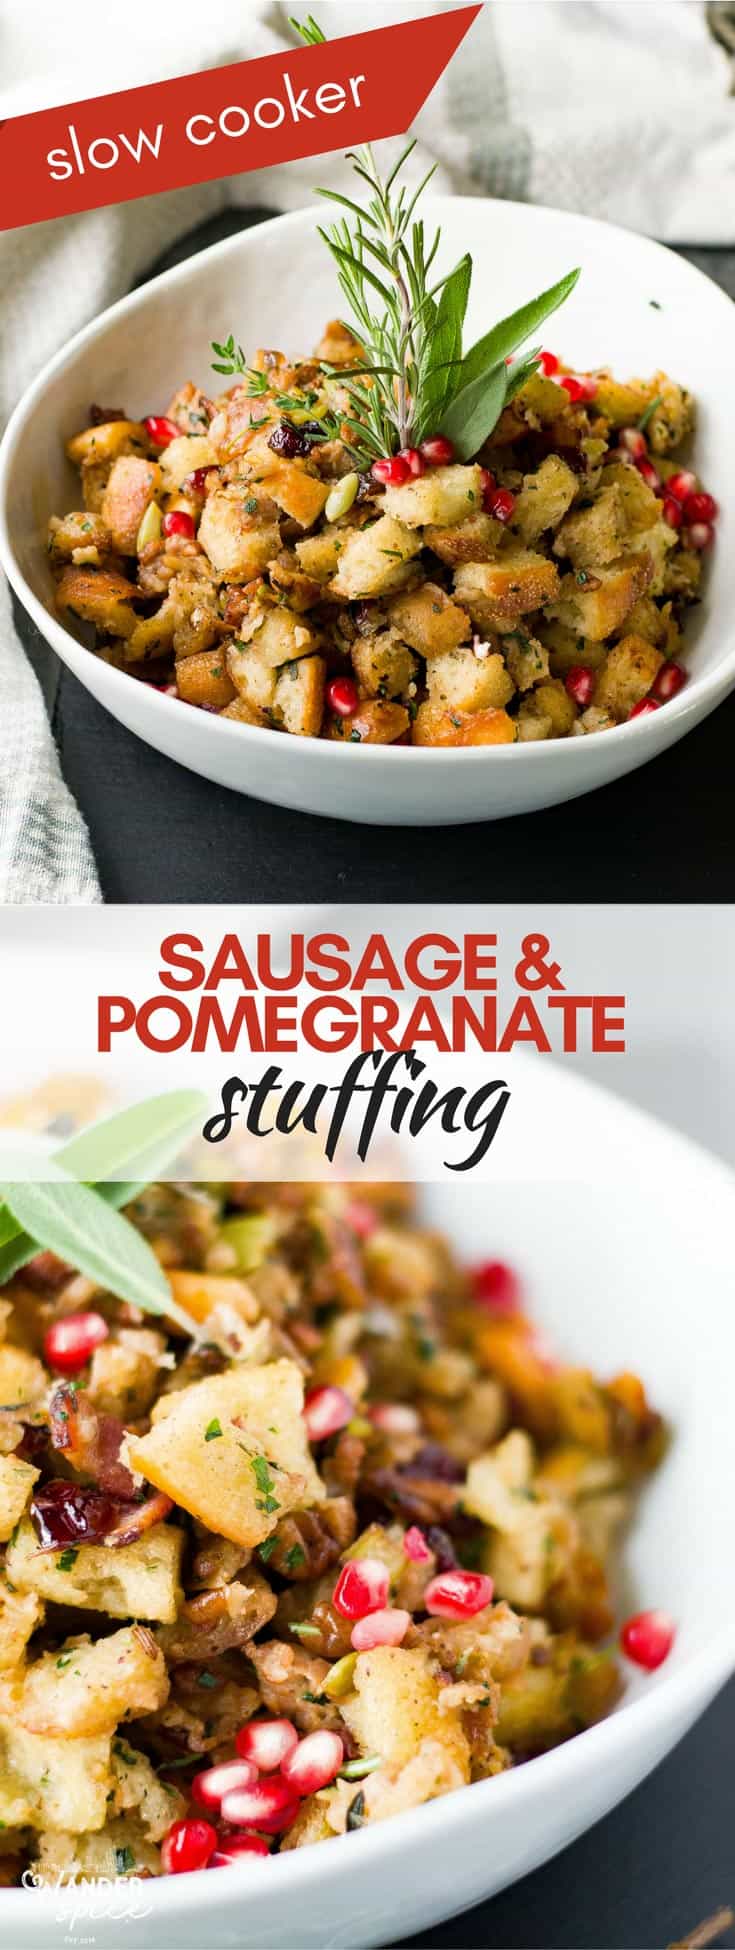 Sausage Stuffing Recipe - Slow Cooker - Crisp Bacon and Pomegranate seeds